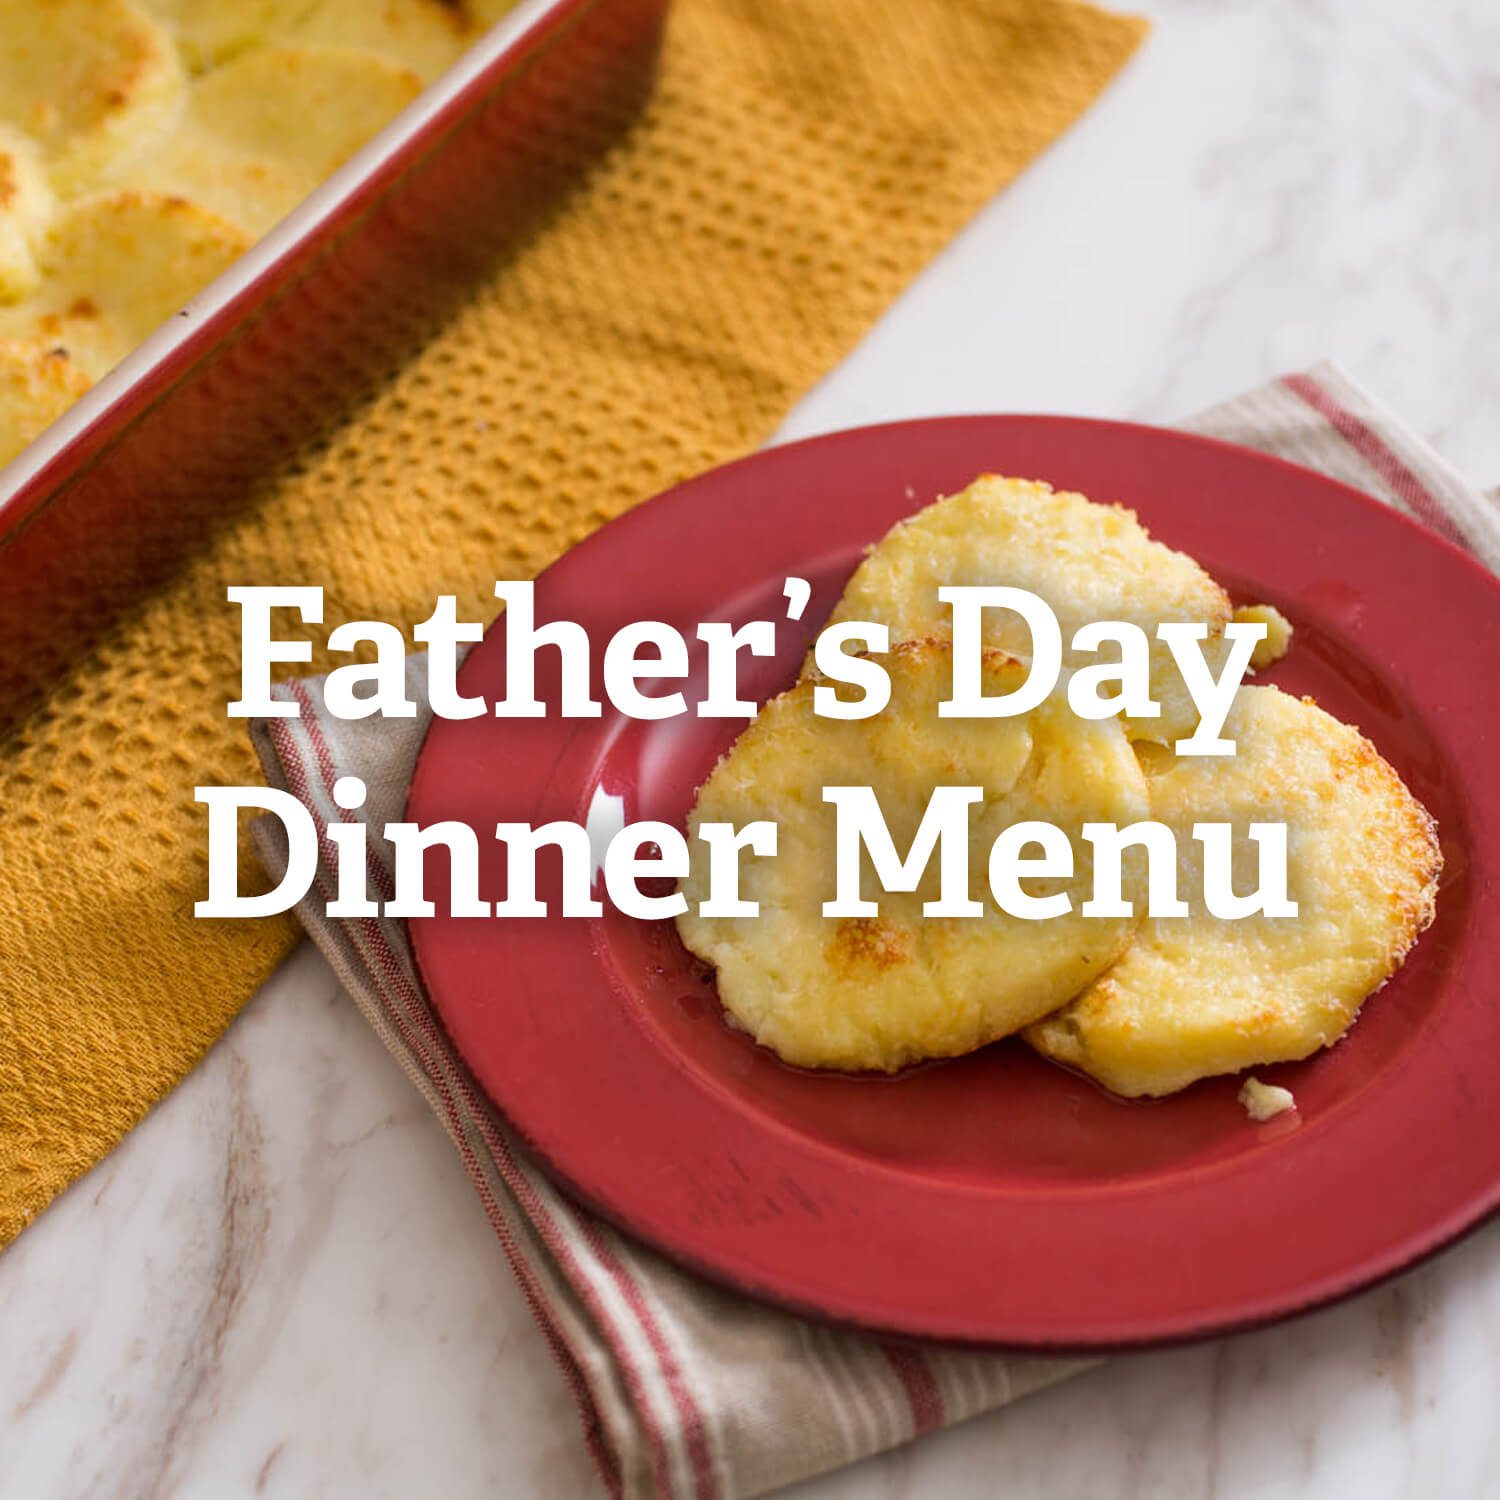 Fathers Day Food Specials
 Dinner Menu for Father s Day